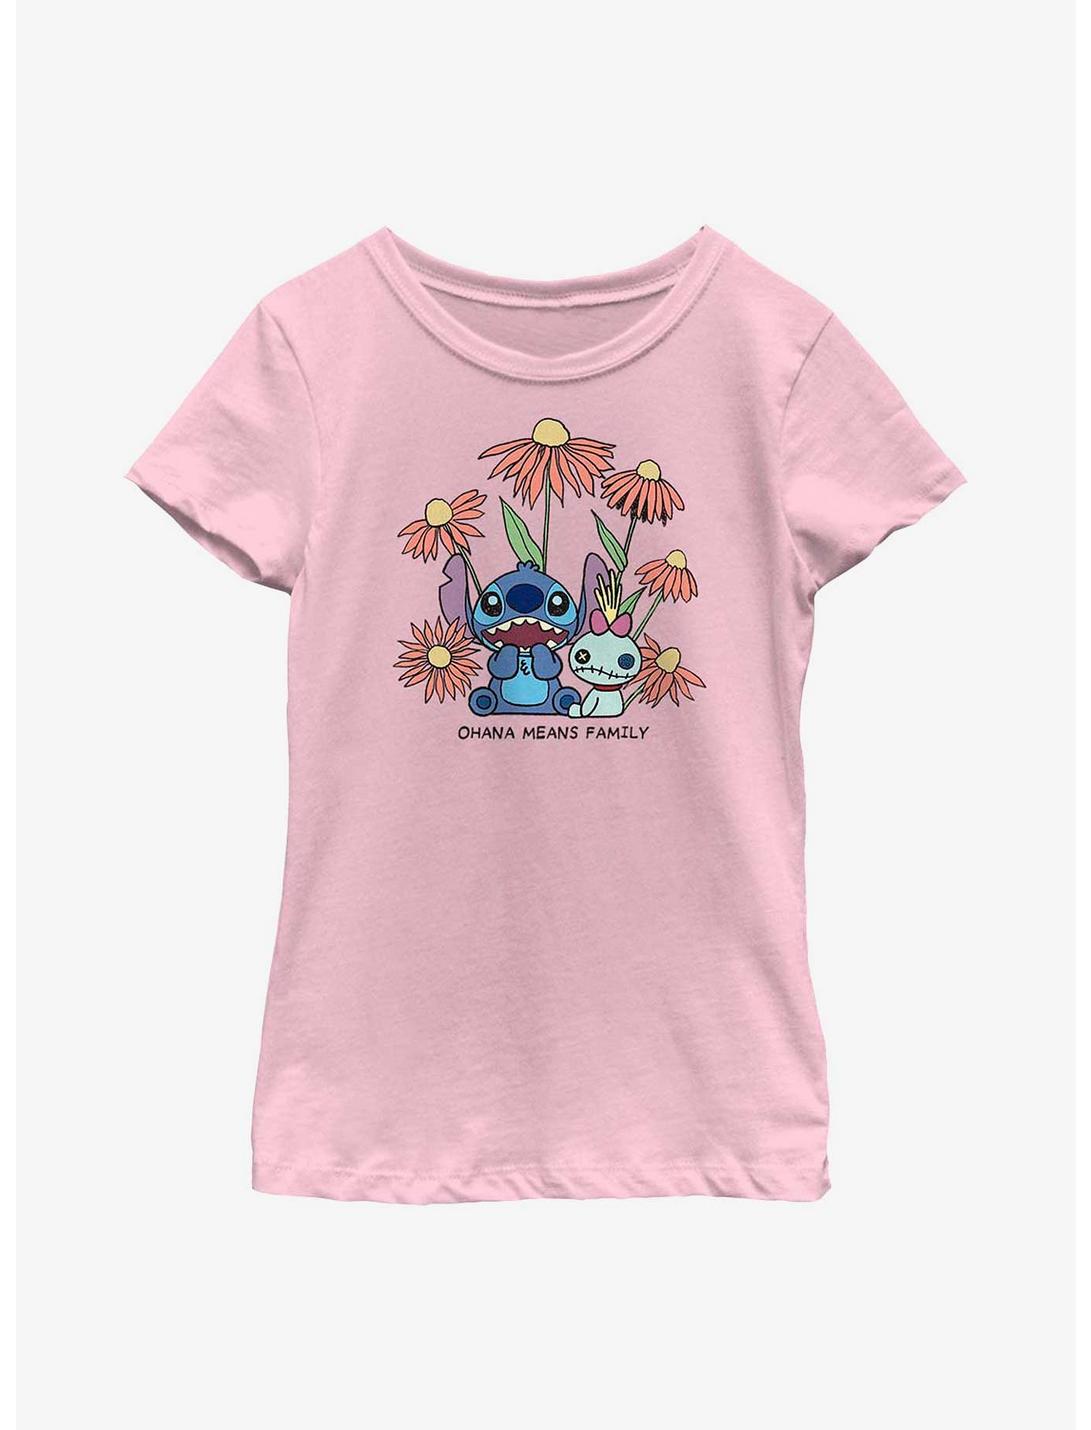 Disney Lilo & Stitch Chibi Floral Ohana Means Family Youth Girls T-Shirt, PINK, hi-res